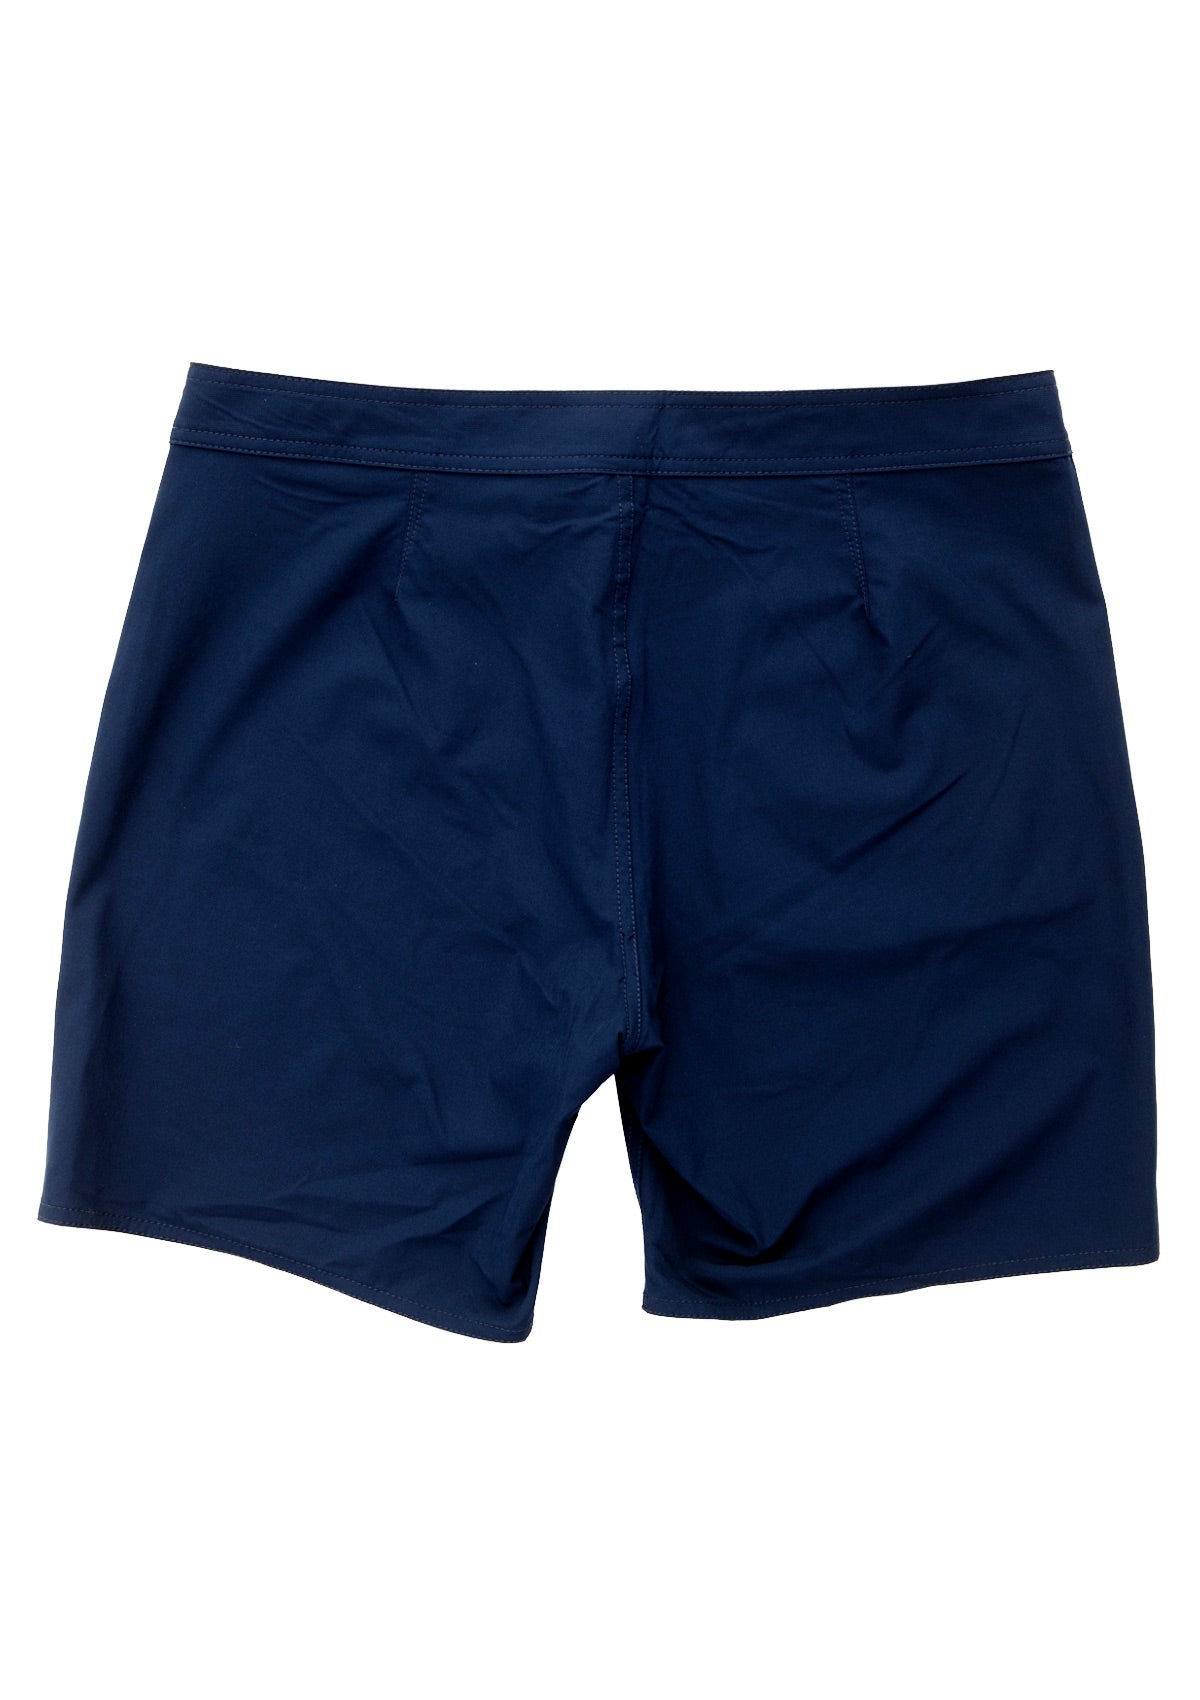 needessentials side mens surfing boardshorts non branded navy swimming